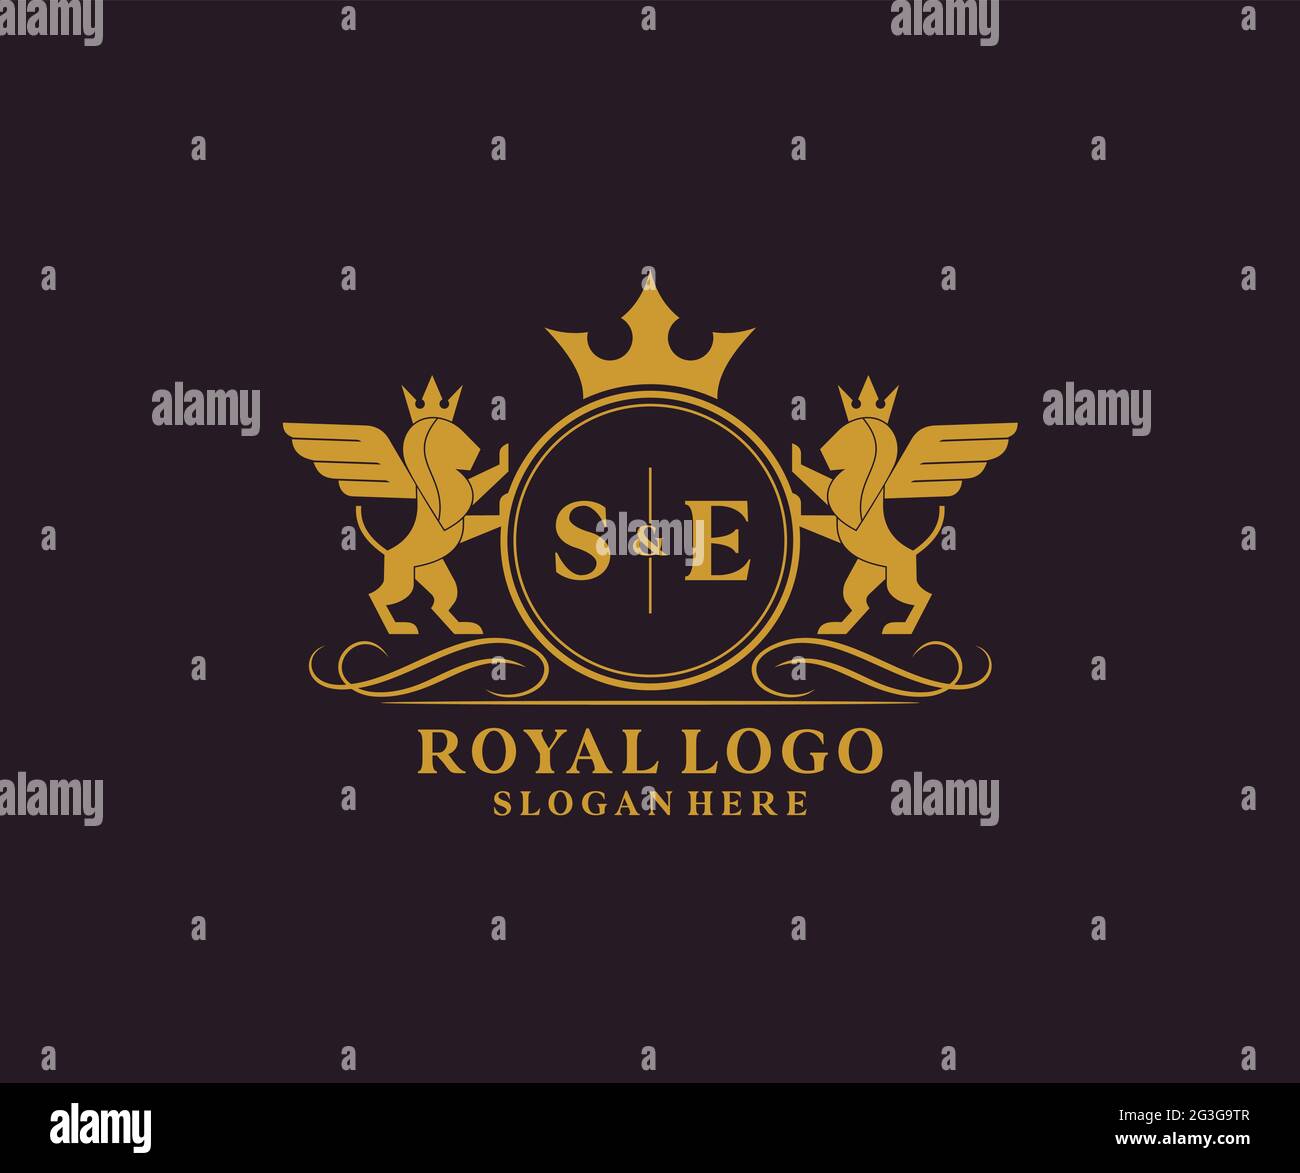 SE Letter Lion Royal Luxury Heraldic,Crest Logo template in vector art for Restaurant, Royalty, Boutique, Cafe, Hotel, Heraldic, Jewelry, Fashion and Stock Vector